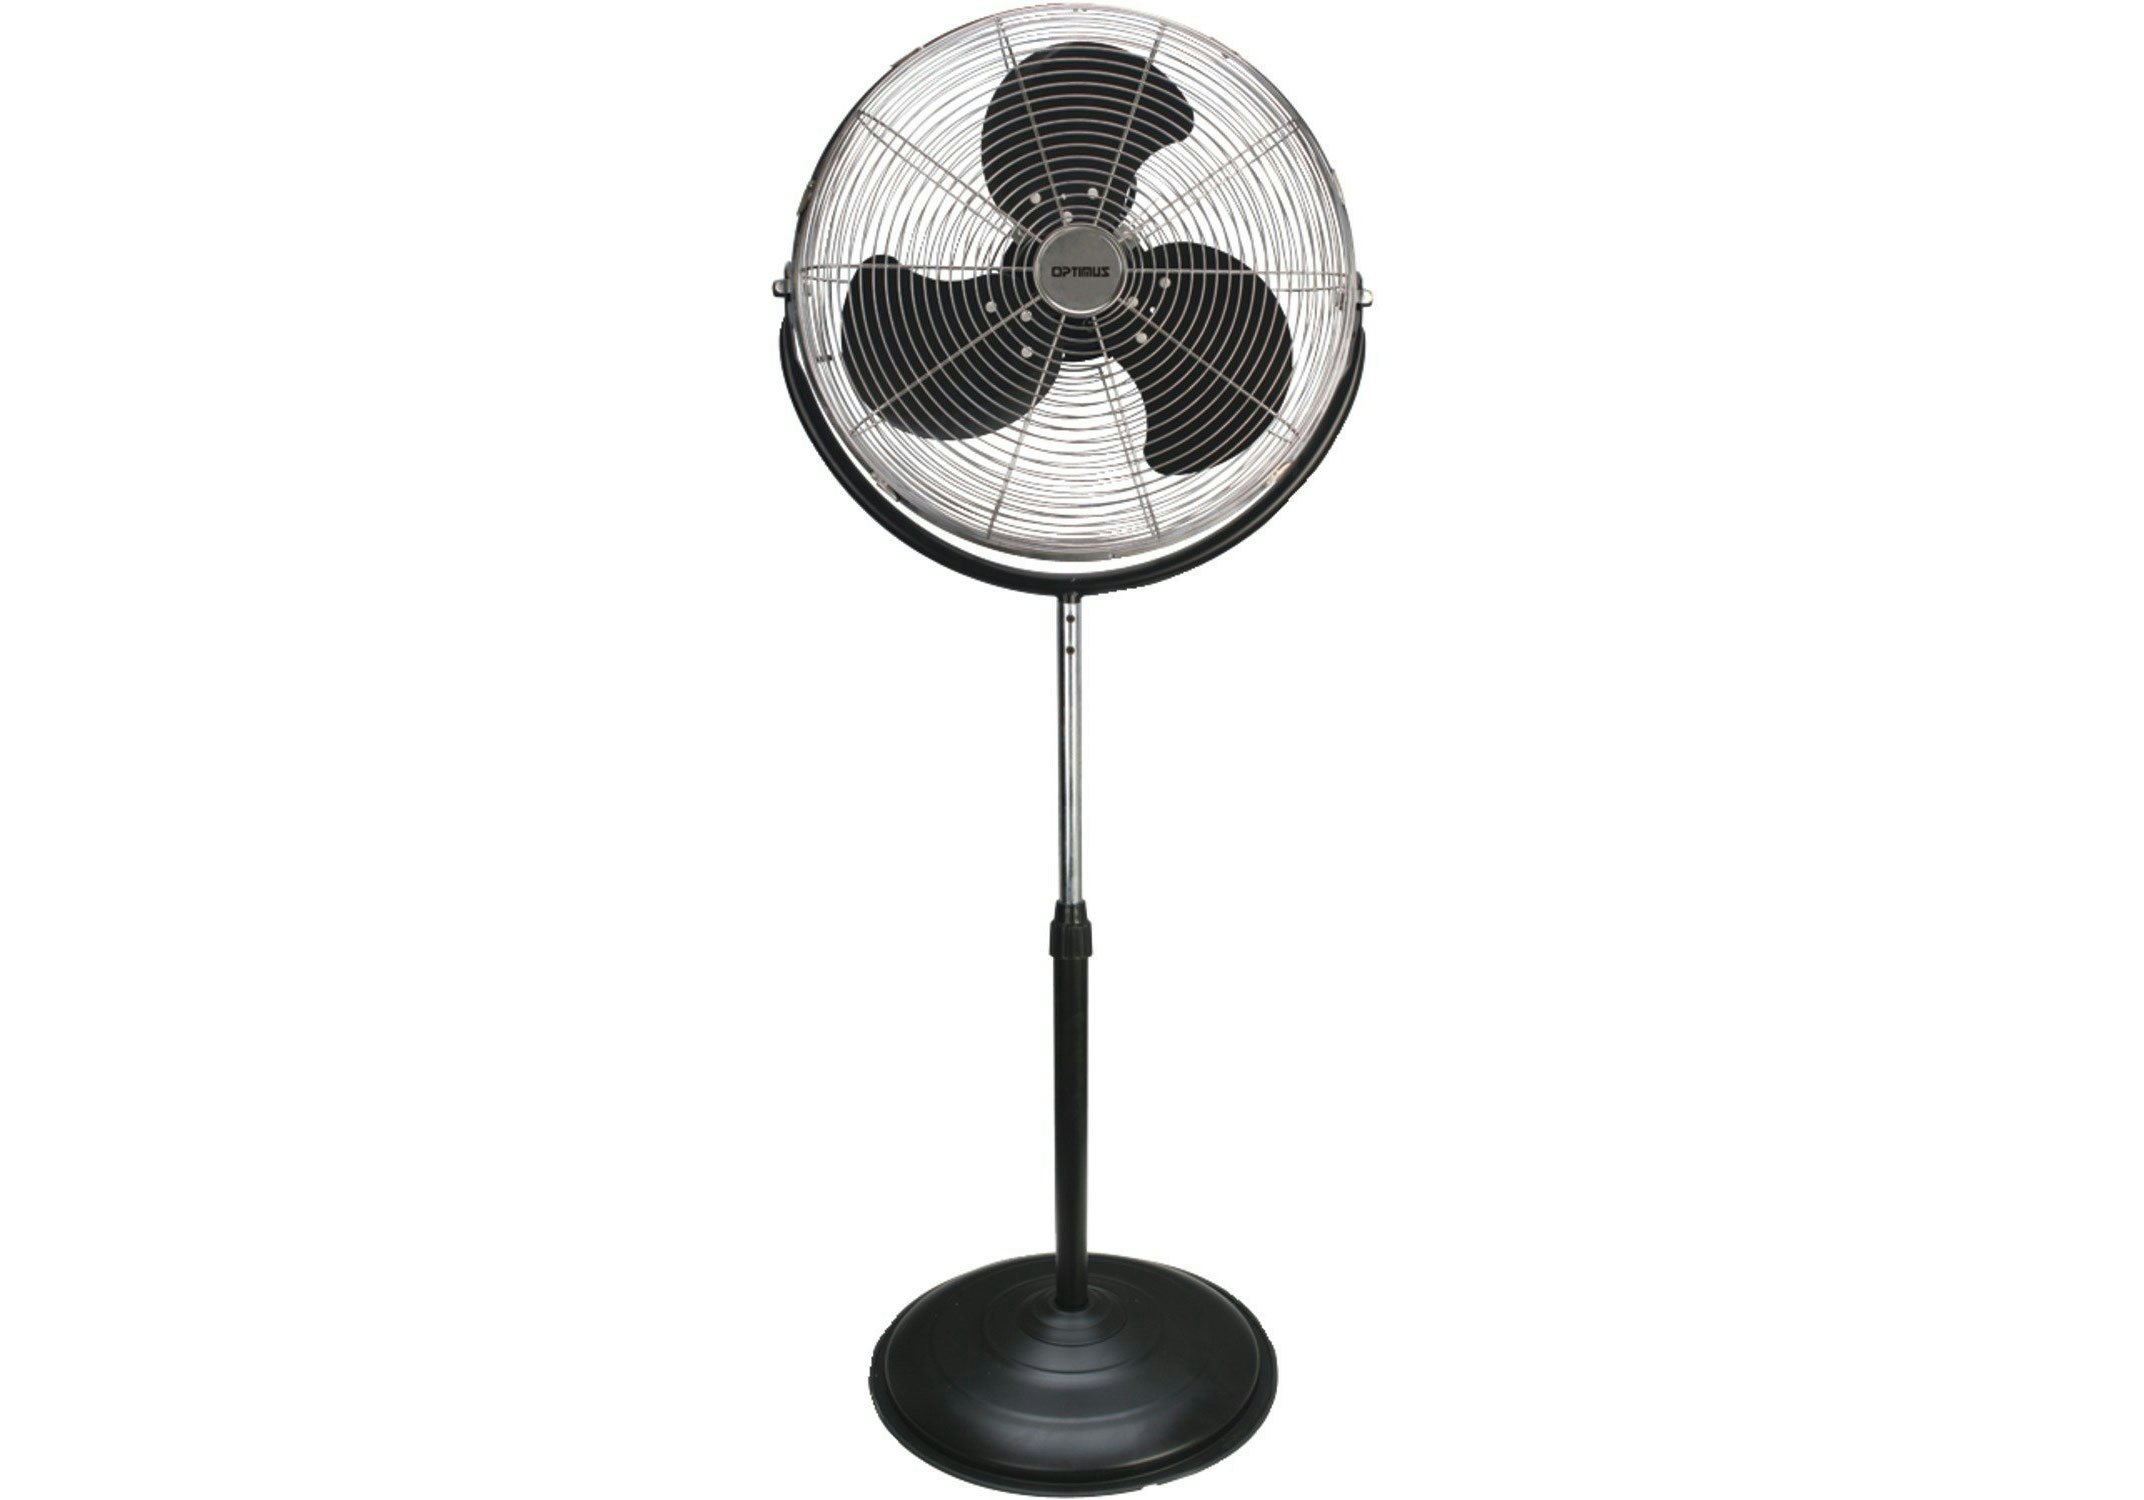 Fans That Cool Like Air Conditioners